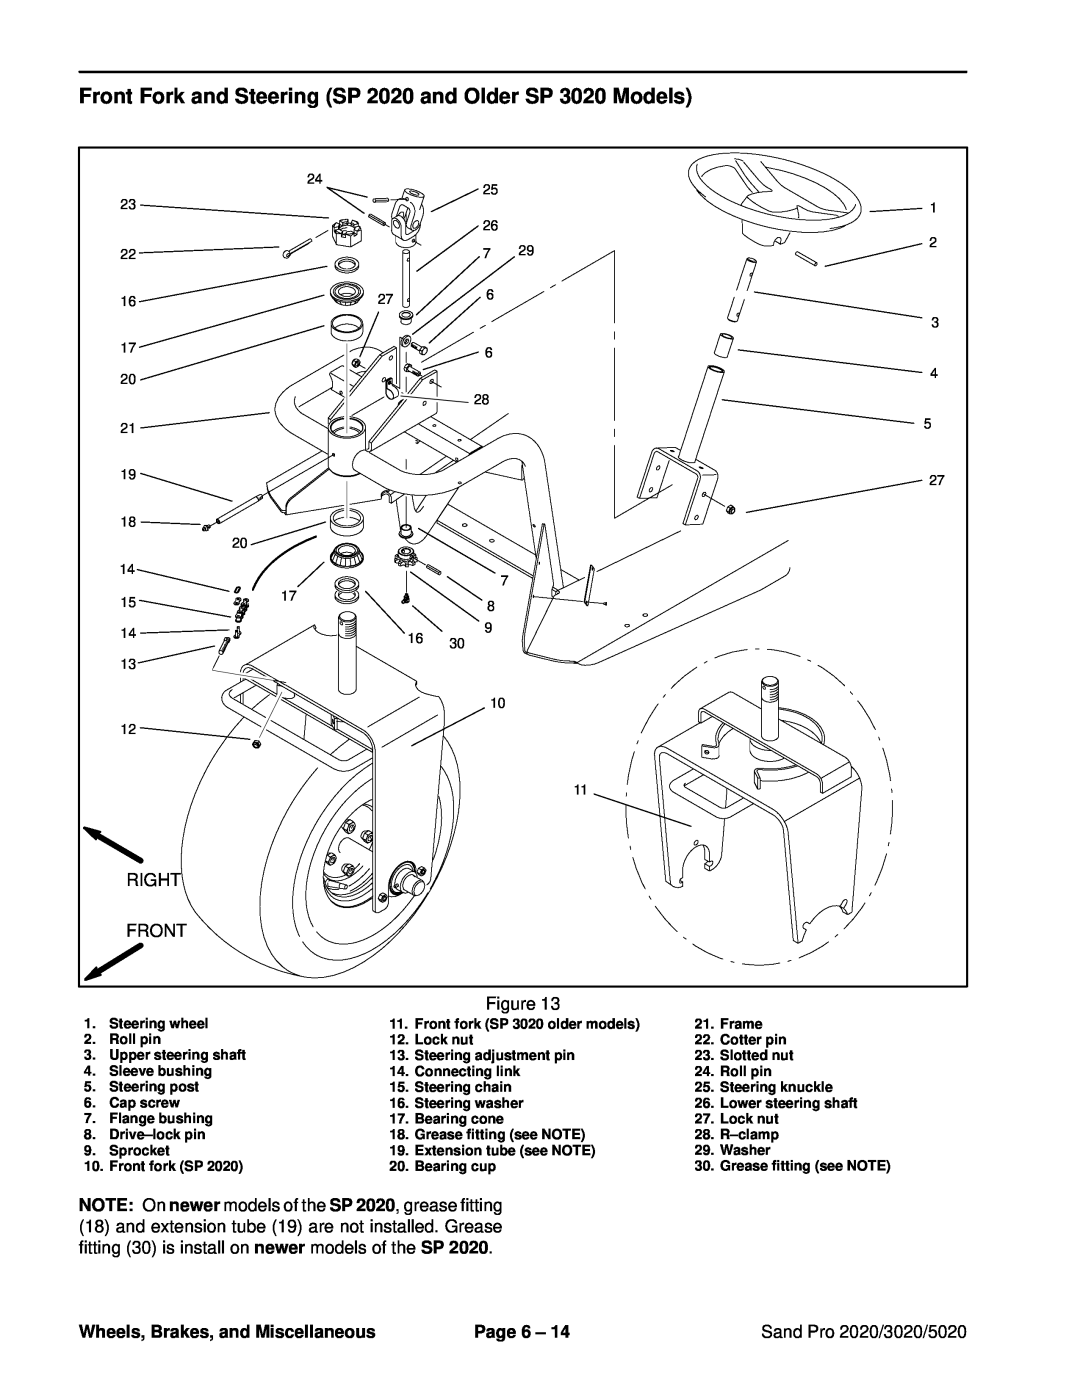 Toro 5020 Front Fork and Steering SP 2020 and Older SP 3020 Models, Wheels, Brakes, and Miscellaneous, Page 6 